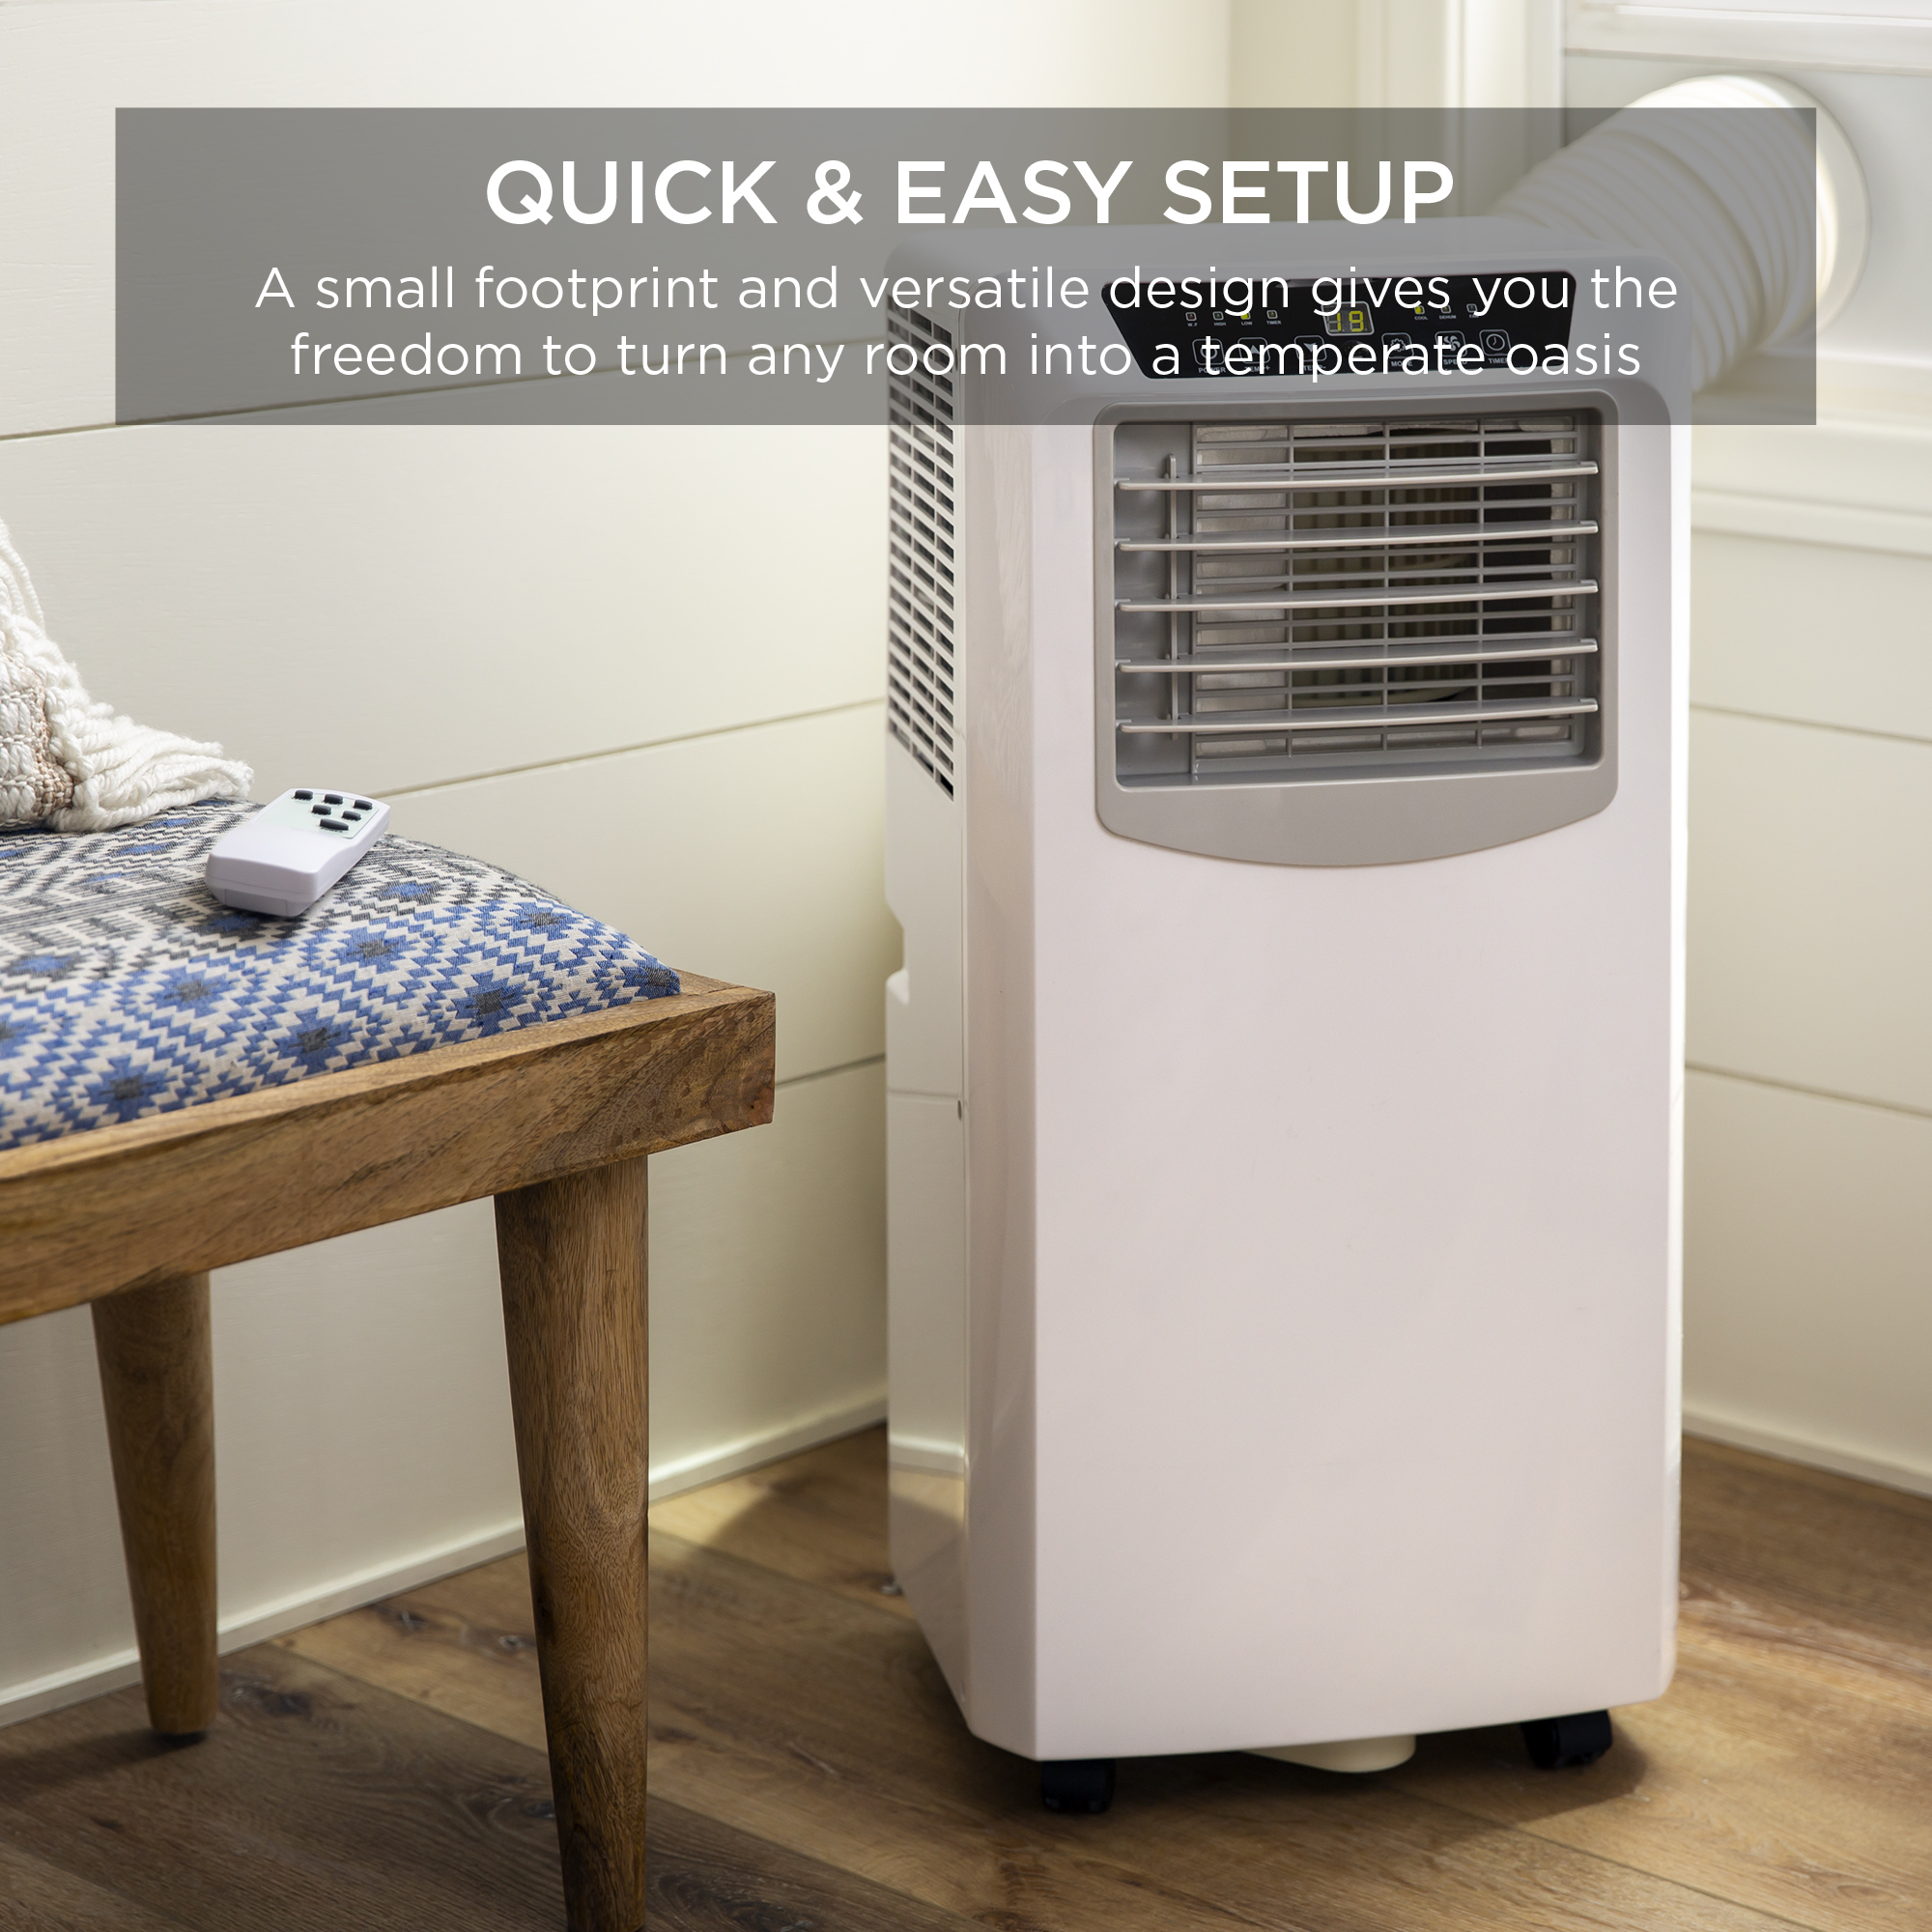 Best Choice Products 10,000 BTU 3-in-1 Air Conditioner Cooling Fan Dehumidifier w/ Remote Control, 200 SqFt Capacity - image 5 of 7